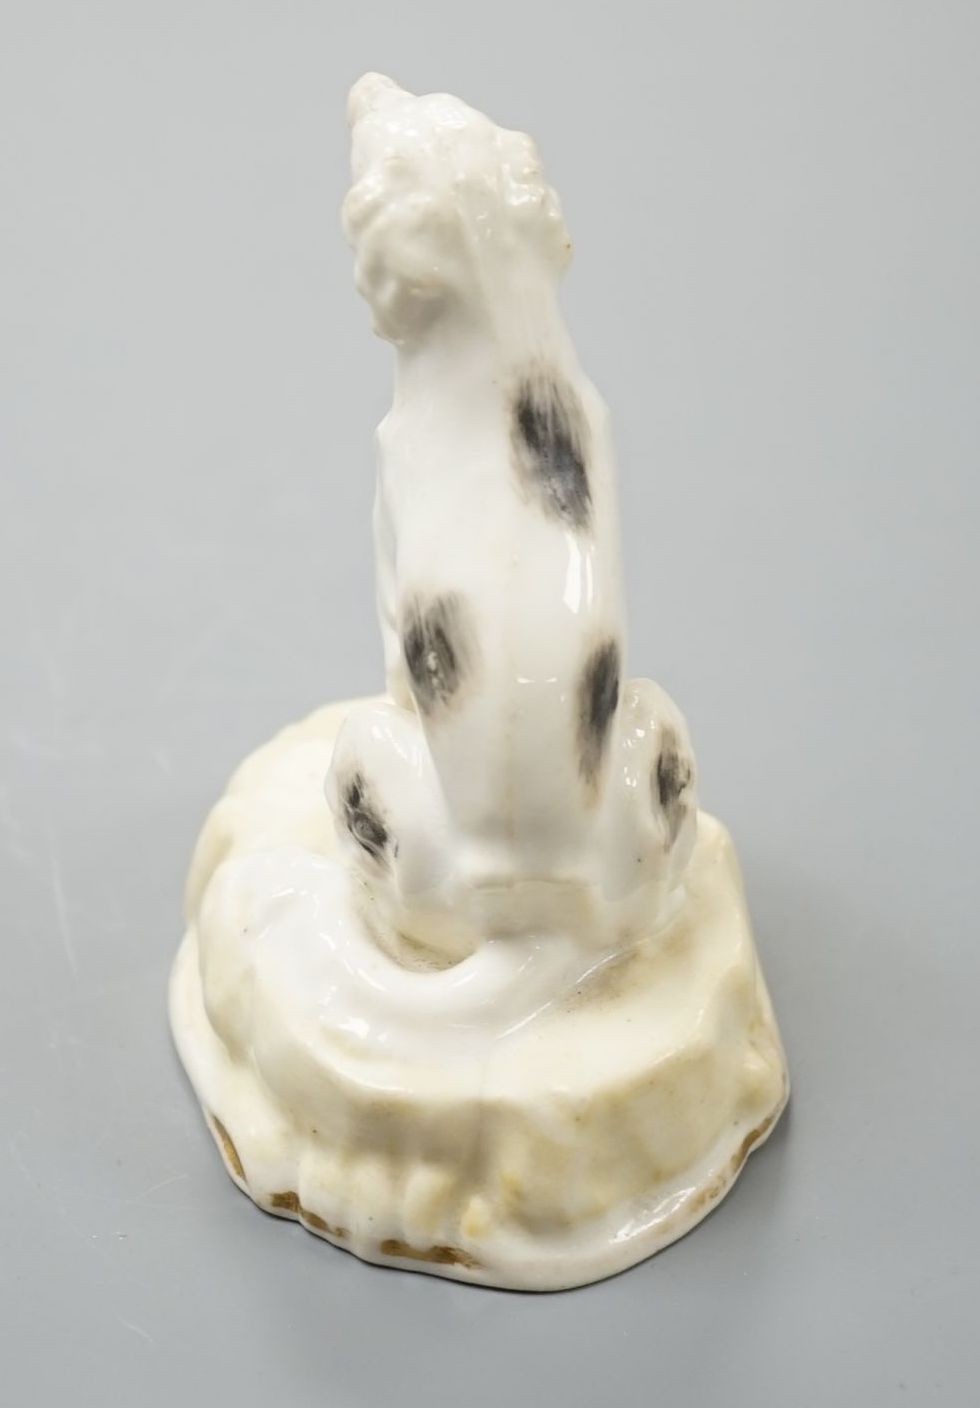 A rare Samuel Alcock porcelain model of a saluki or Persian greyhound, impressed mark 252, 8.3 cm high, Cf. Dennis G.Rice Dogs in English porcelain, colour plate 214 illustrating an identical example with incorrect facto